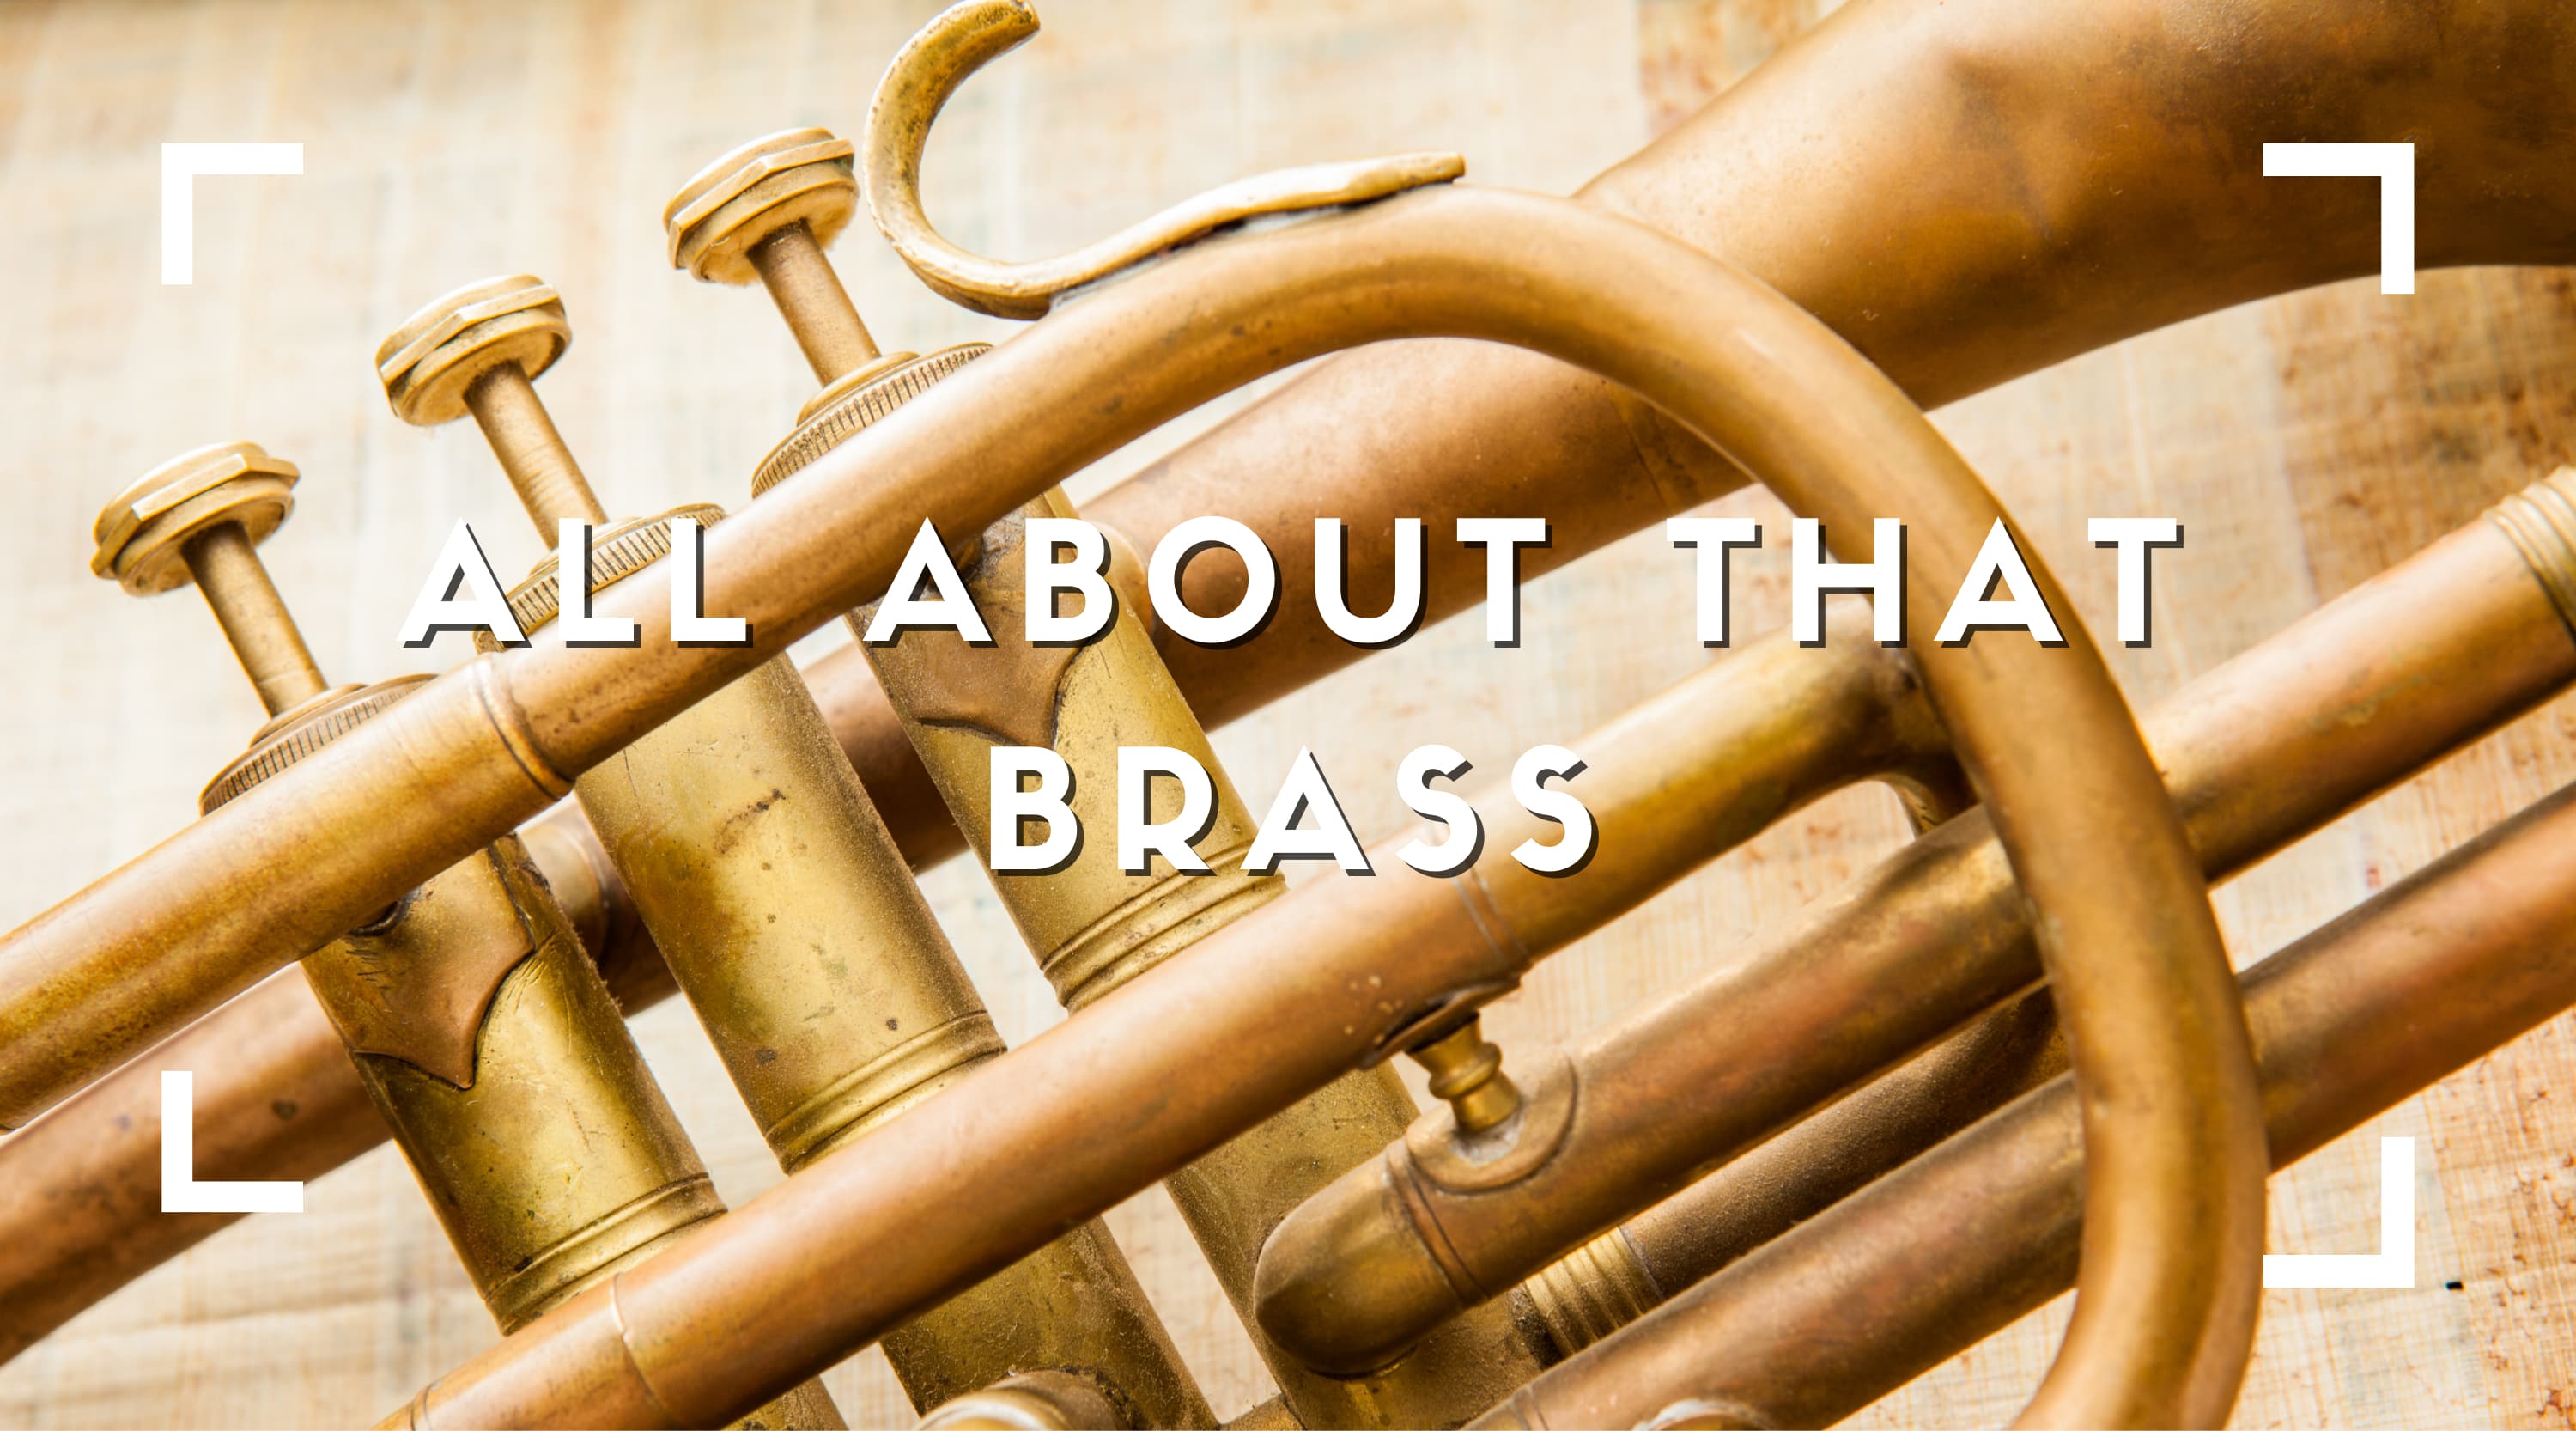 All About That Brass!